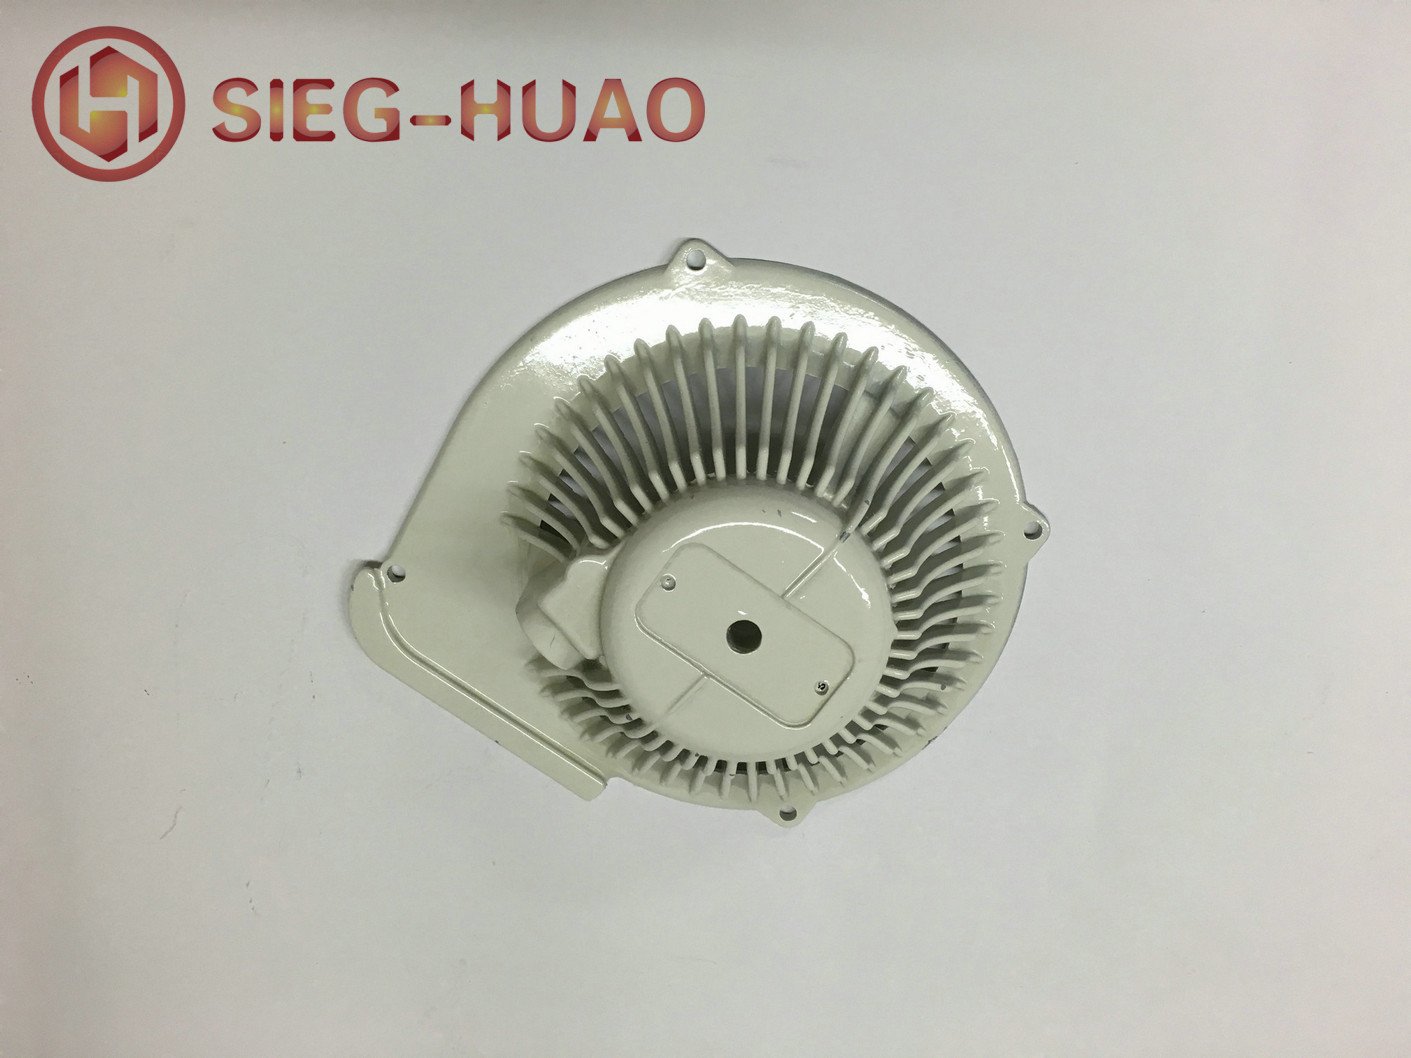 Magnesium Alloy Die Casting Powder Coated Cap for Lawn Mower